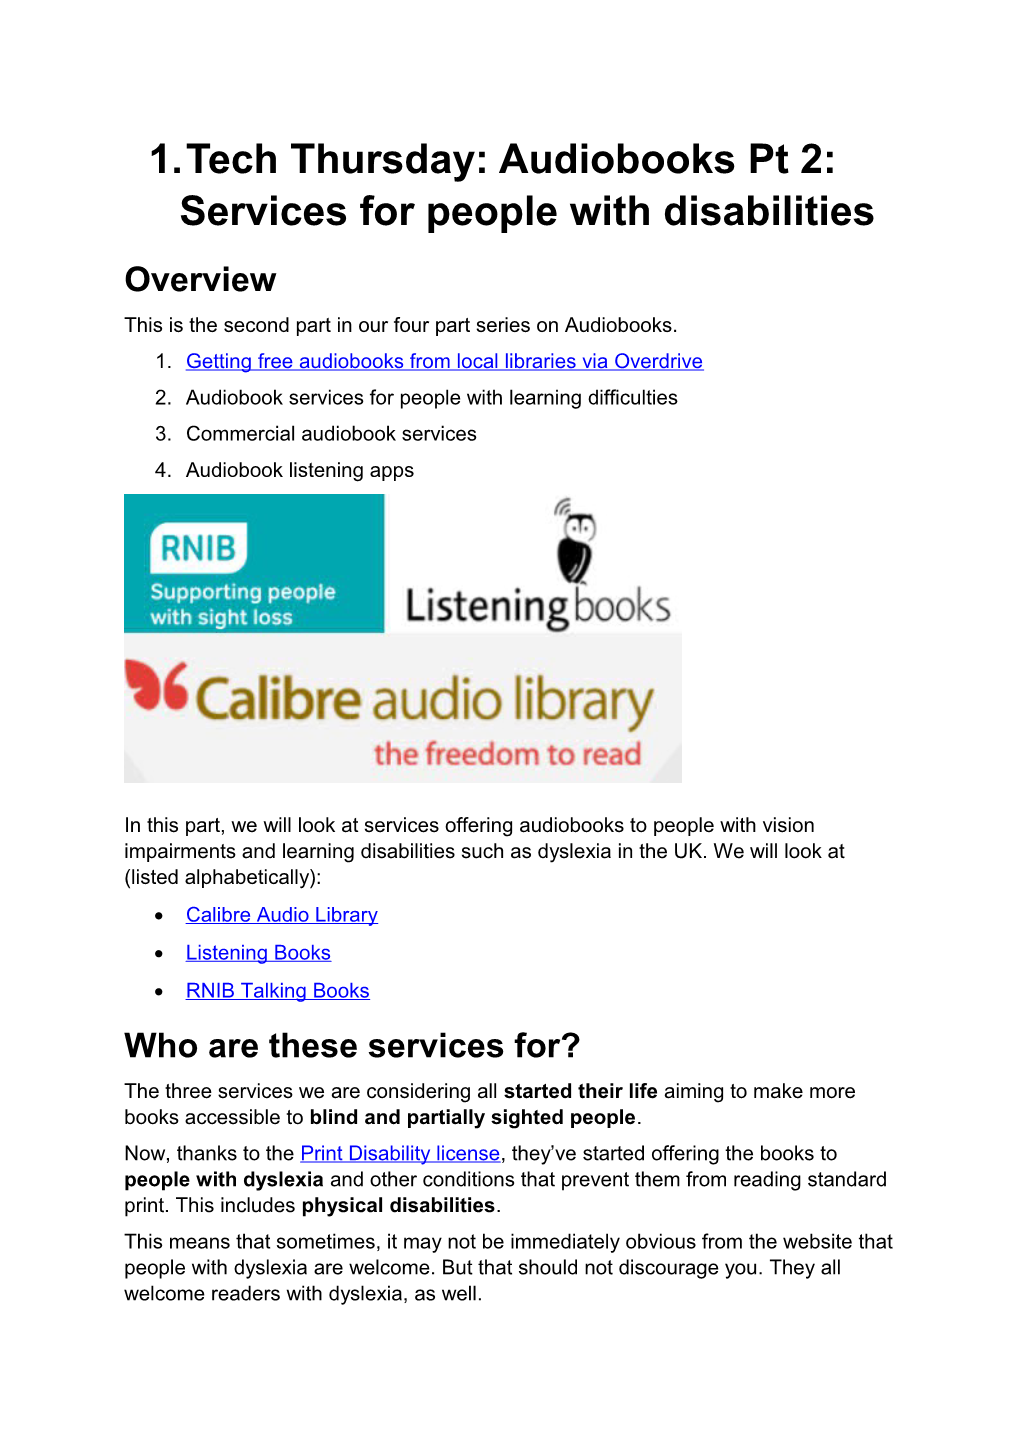 Tech Thursday: Audiobooks Pt 2: Services for People with Disabilities